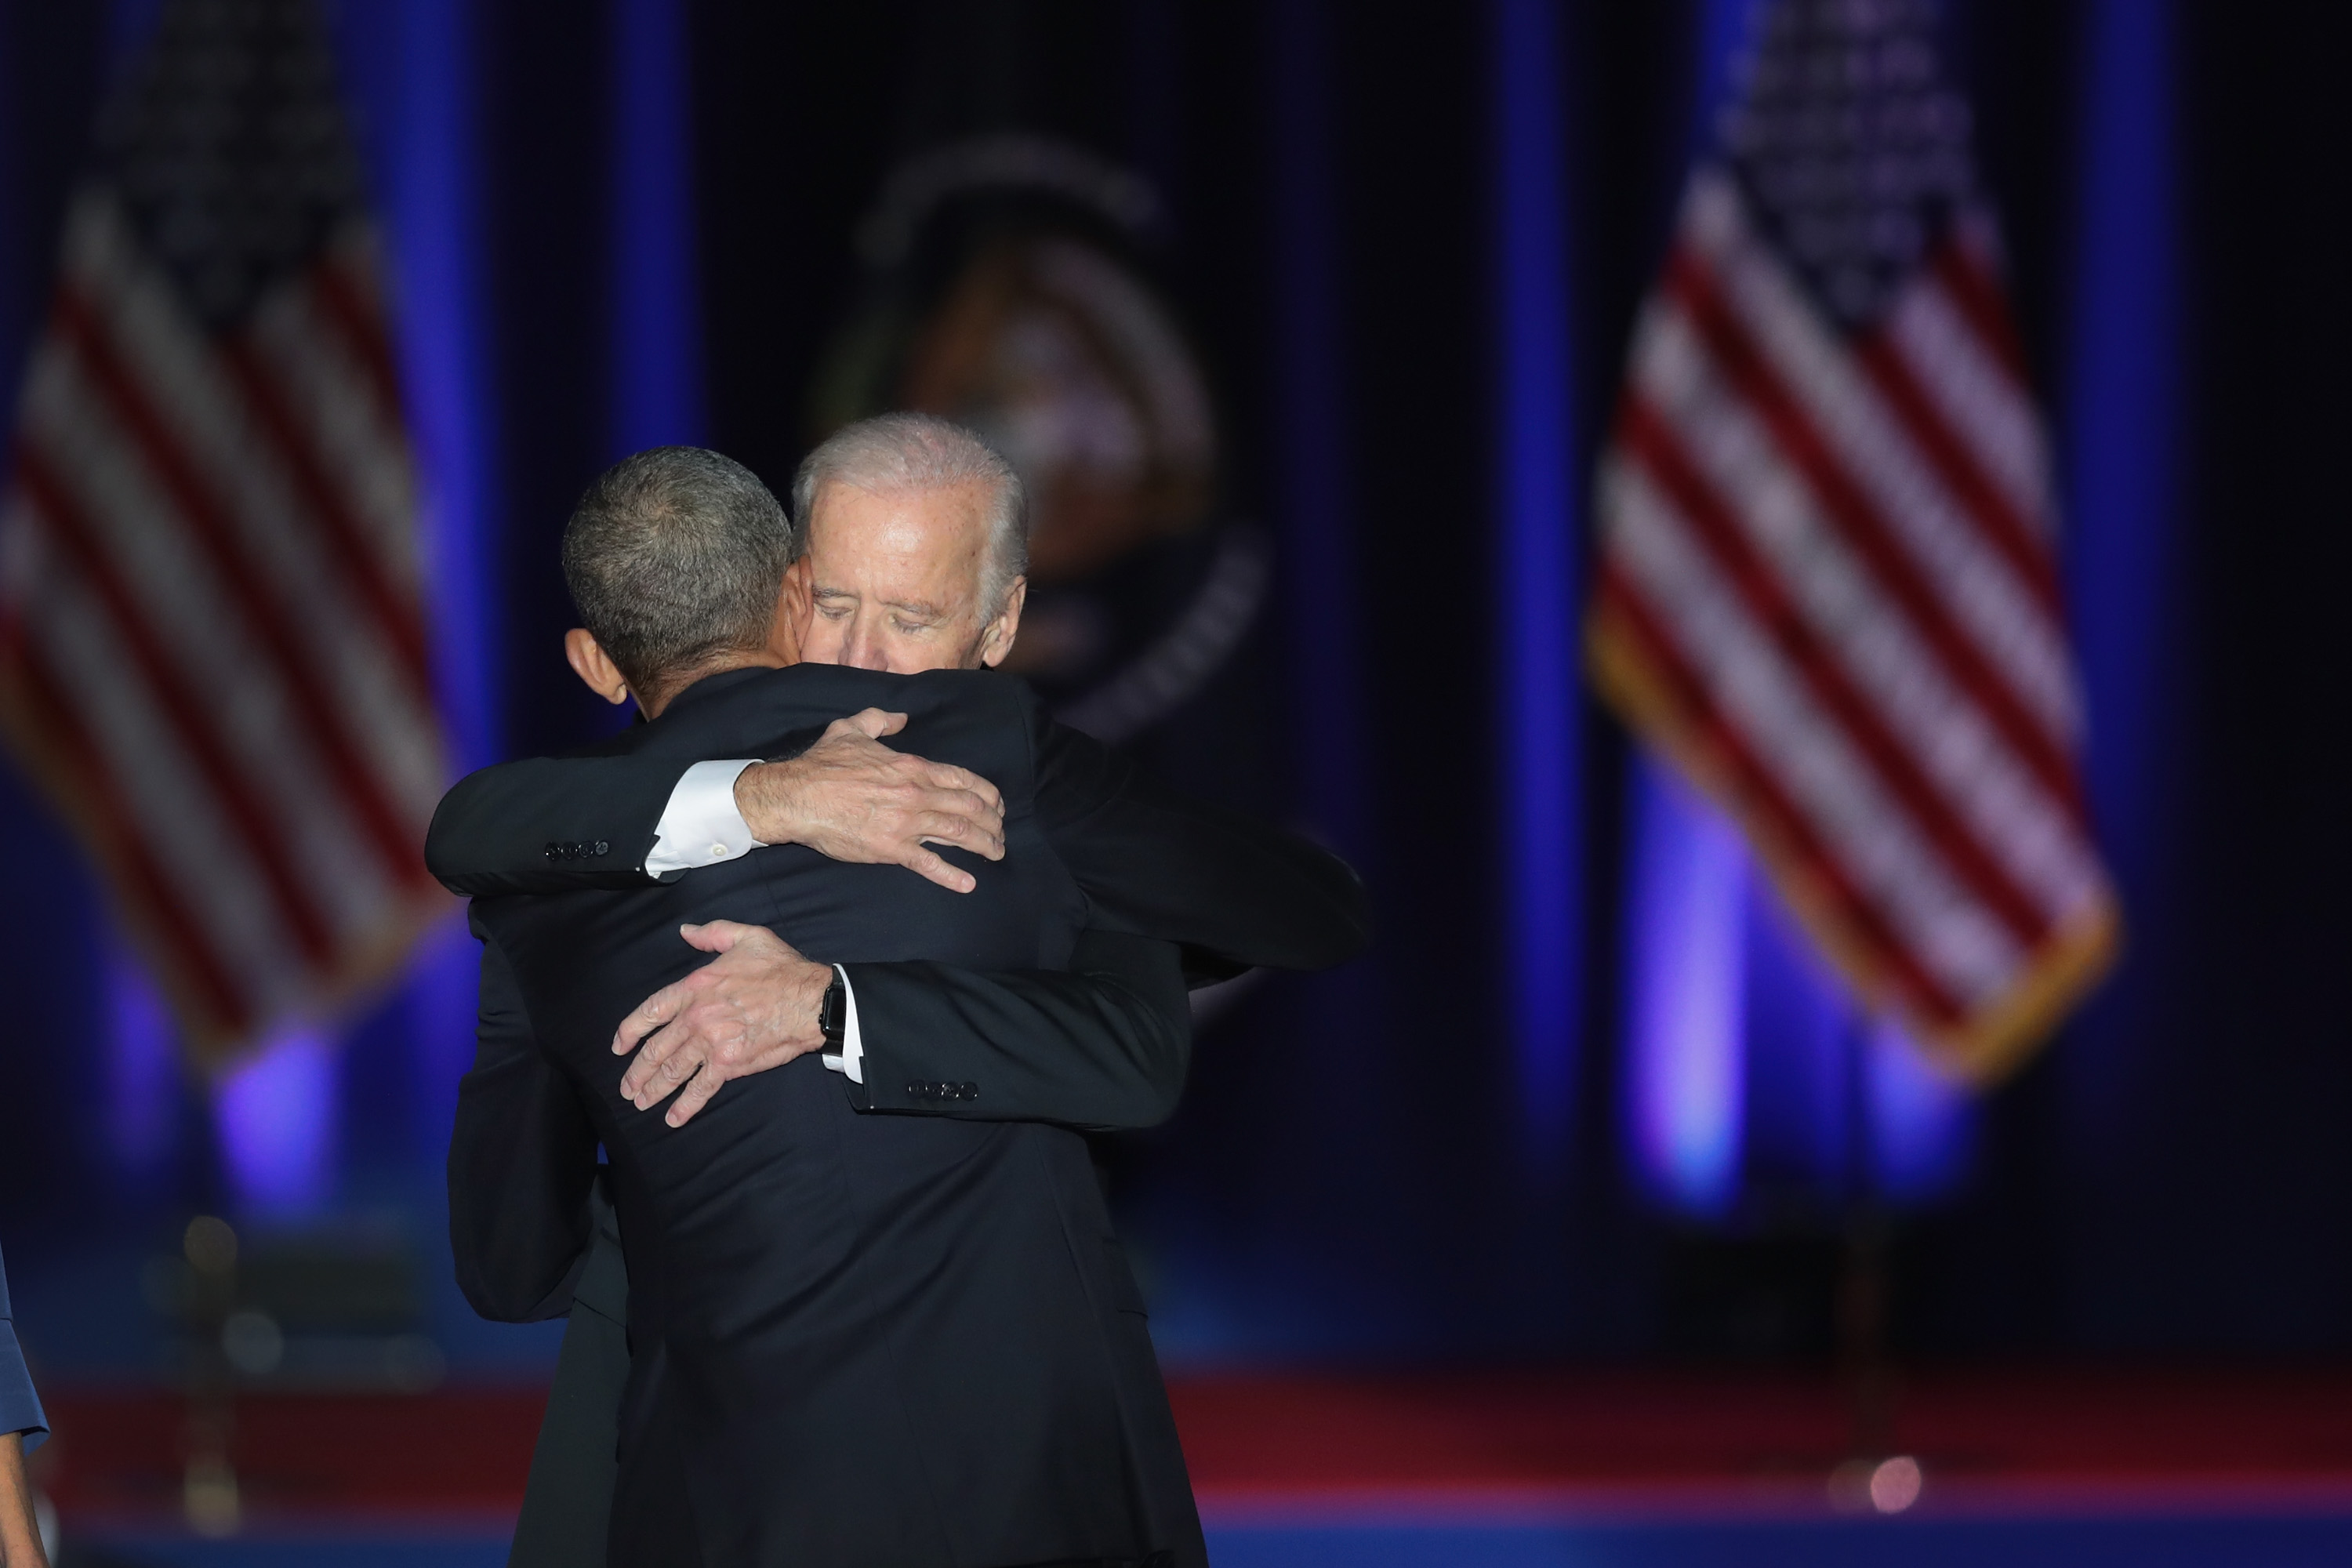 CHICAGO, IL - JANUARY 10: President Barack Obama embraces Vice President Joe Biden after Obama delivered his farewell speech to the nation on January 10, 2017 in Chicago, Illinois. President-elect Donald Trump will be sworn in the as the 45th president on January 20. (Photo by Scott Olson/Getty Images)